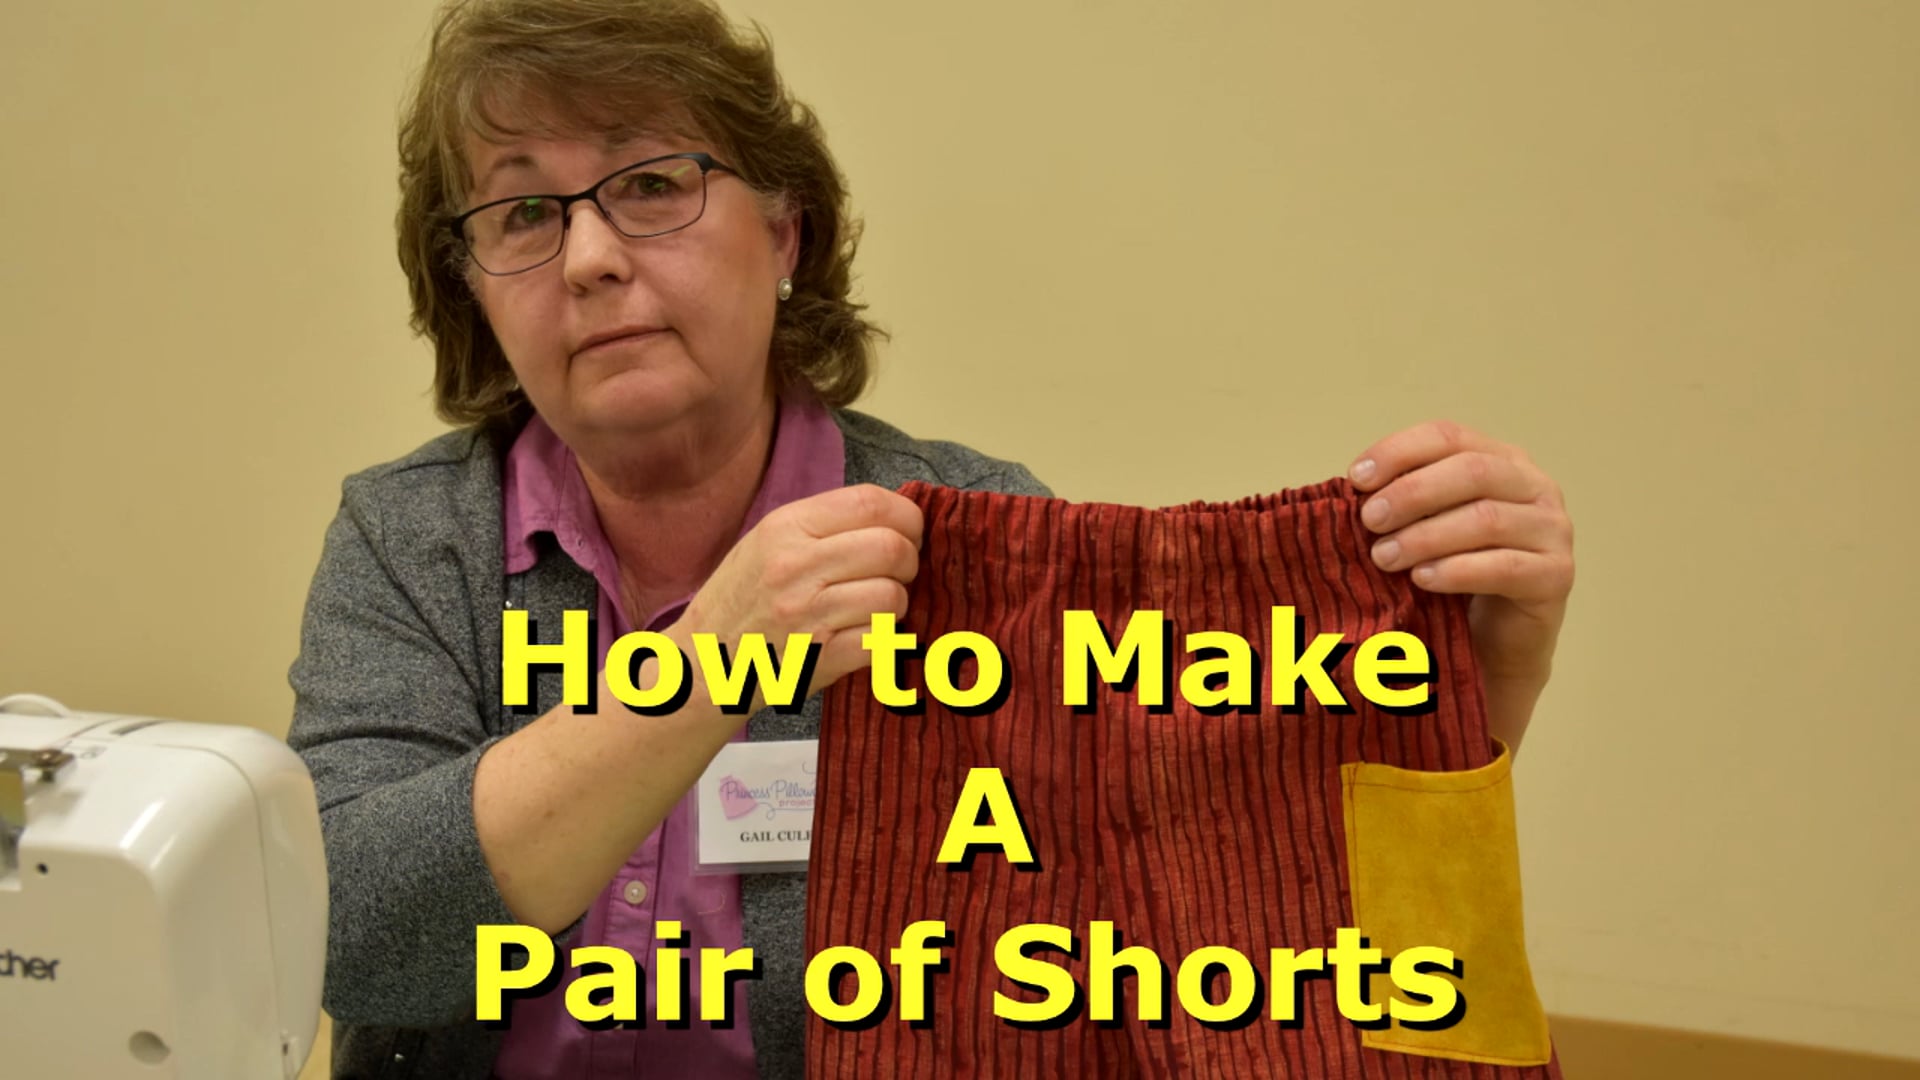 Princess Pillowcase Project:  How to Make A Pair of Shorts